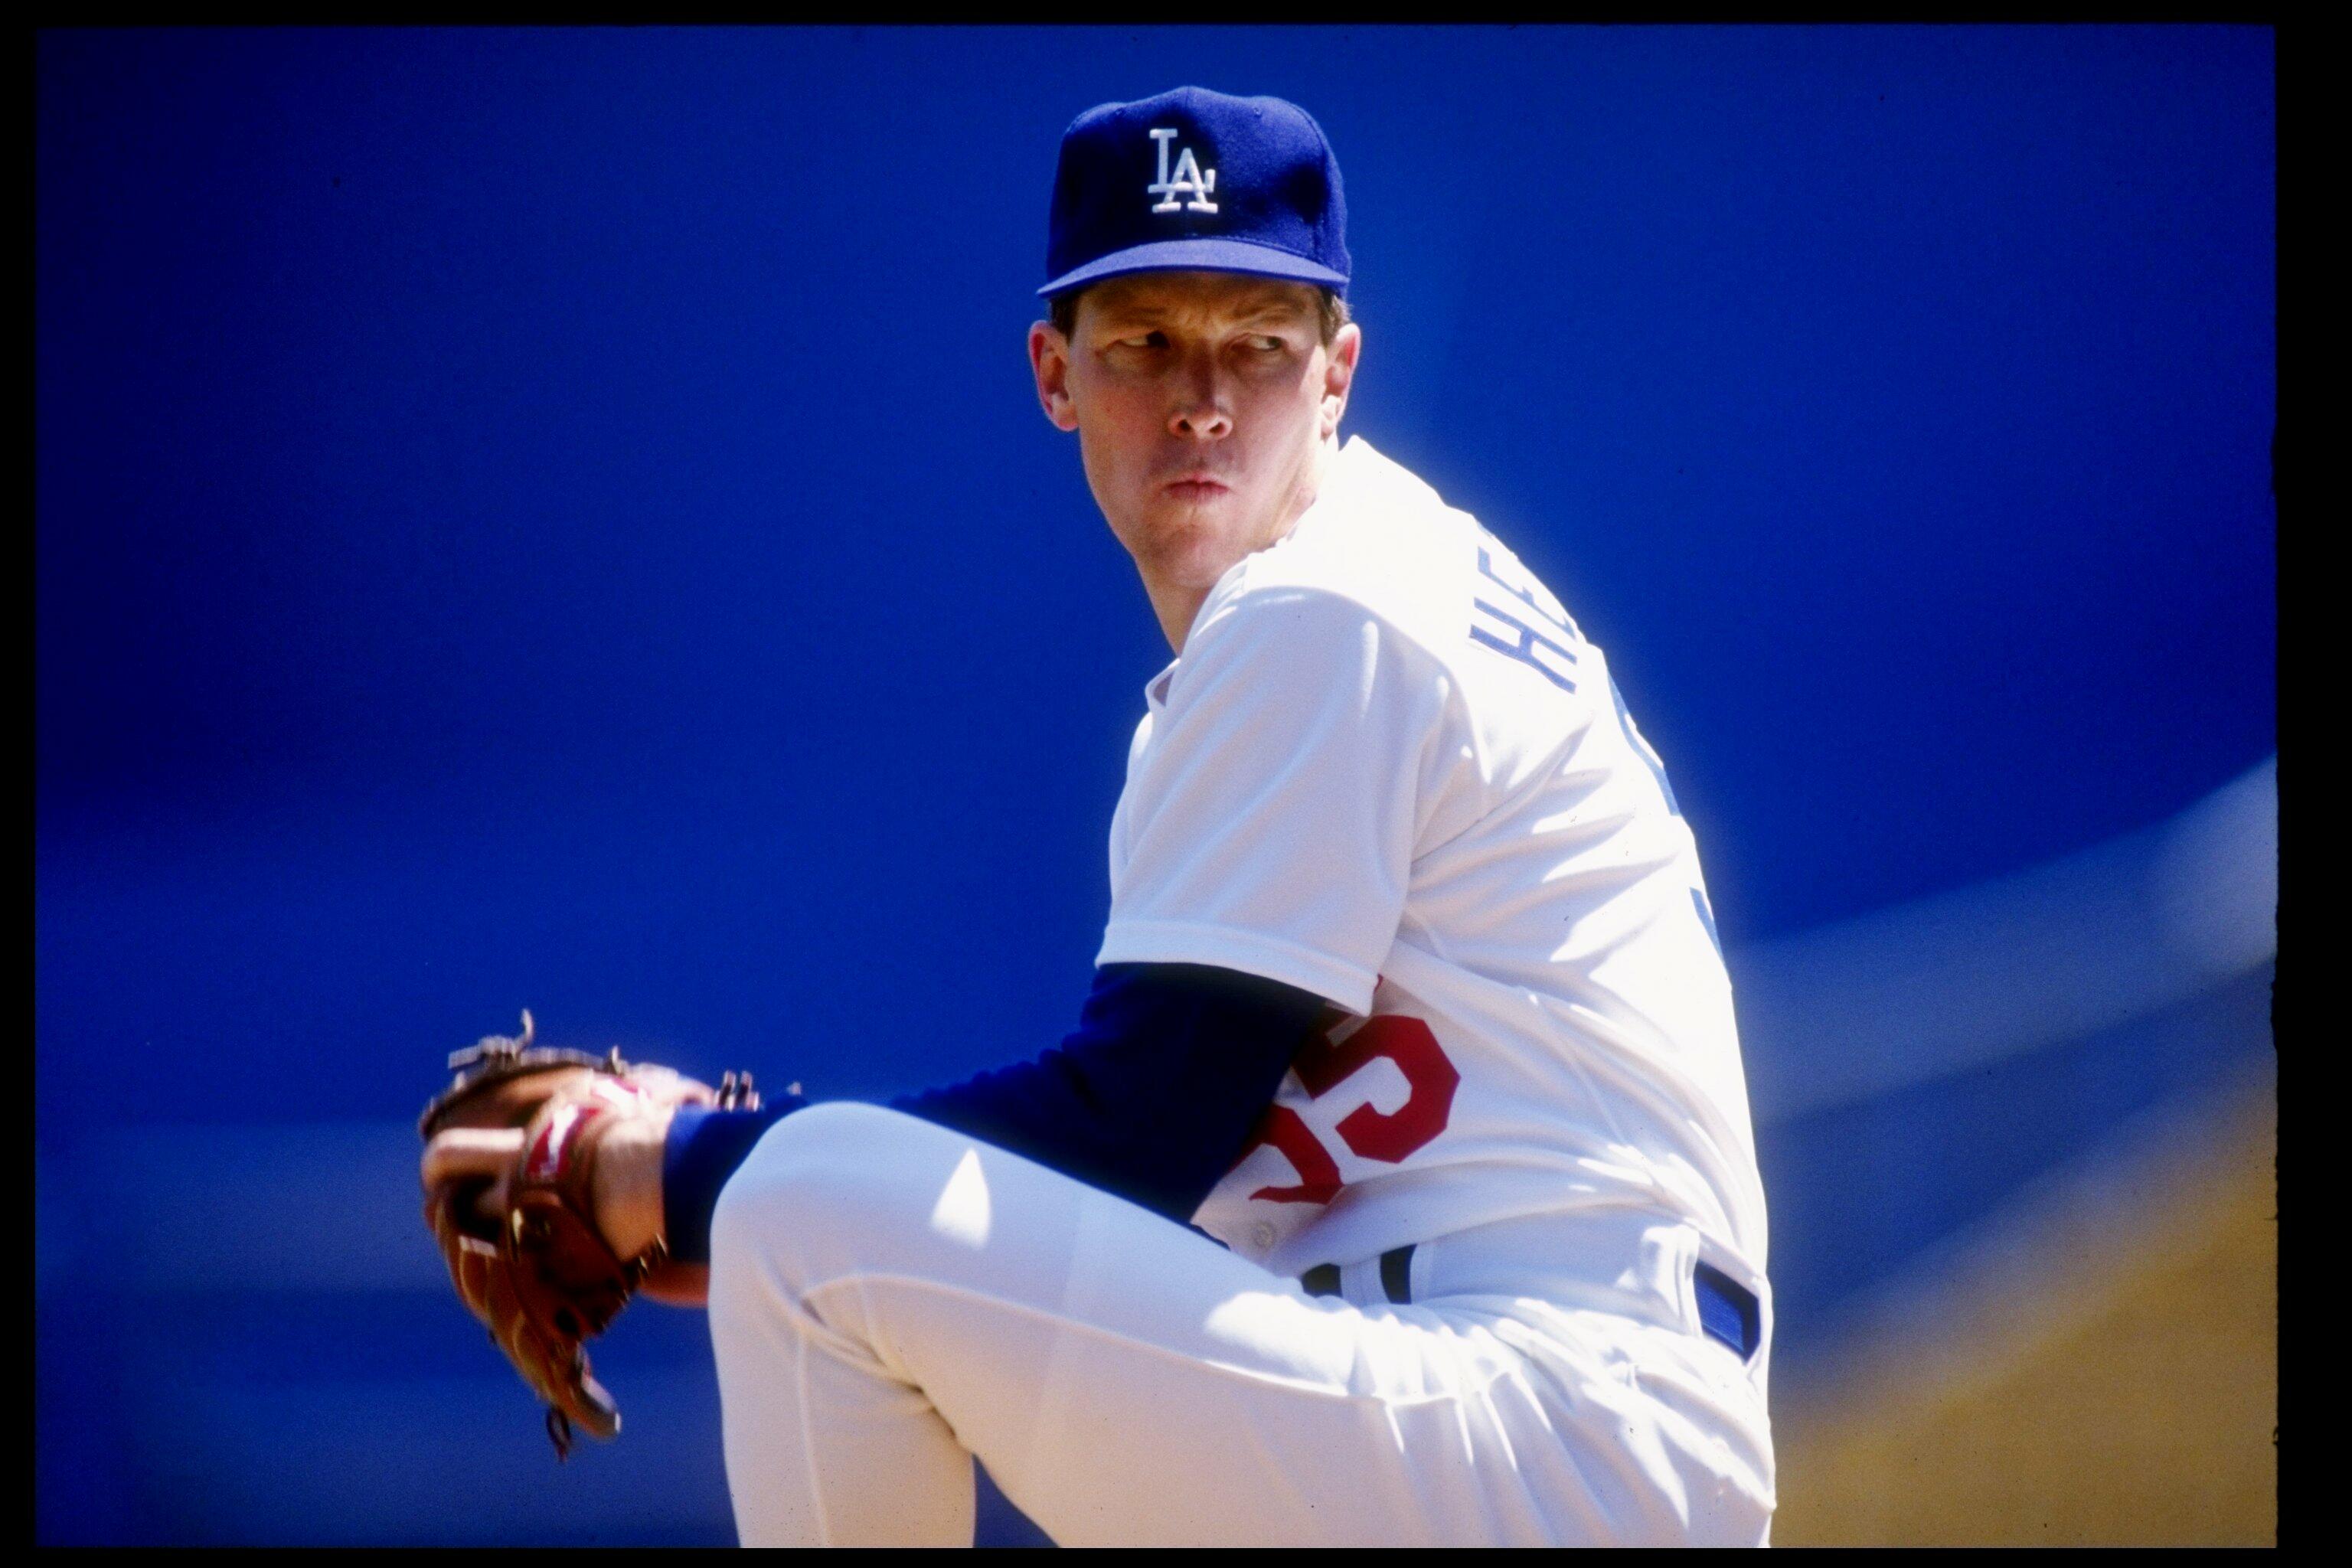 1991:  Pitcher Orel Hershiser of the Los Angeles Dodgers winds up to pitch during a game. Mandatory Credit: Stephen Dunn  /Allsport